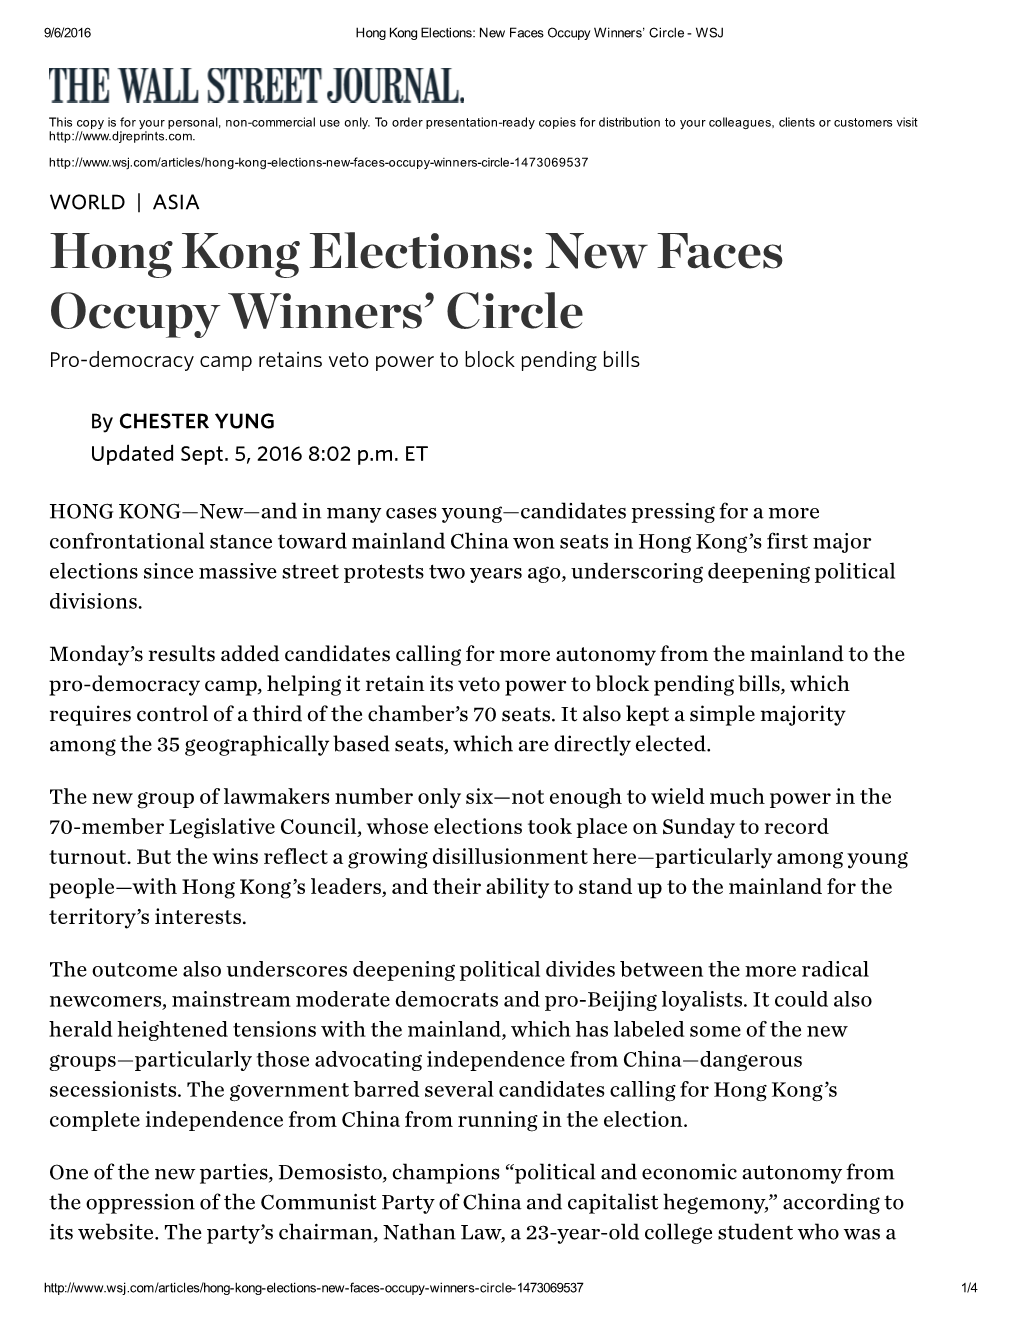 Hong Kong Elections: New Faces Occupy Winners' Circle